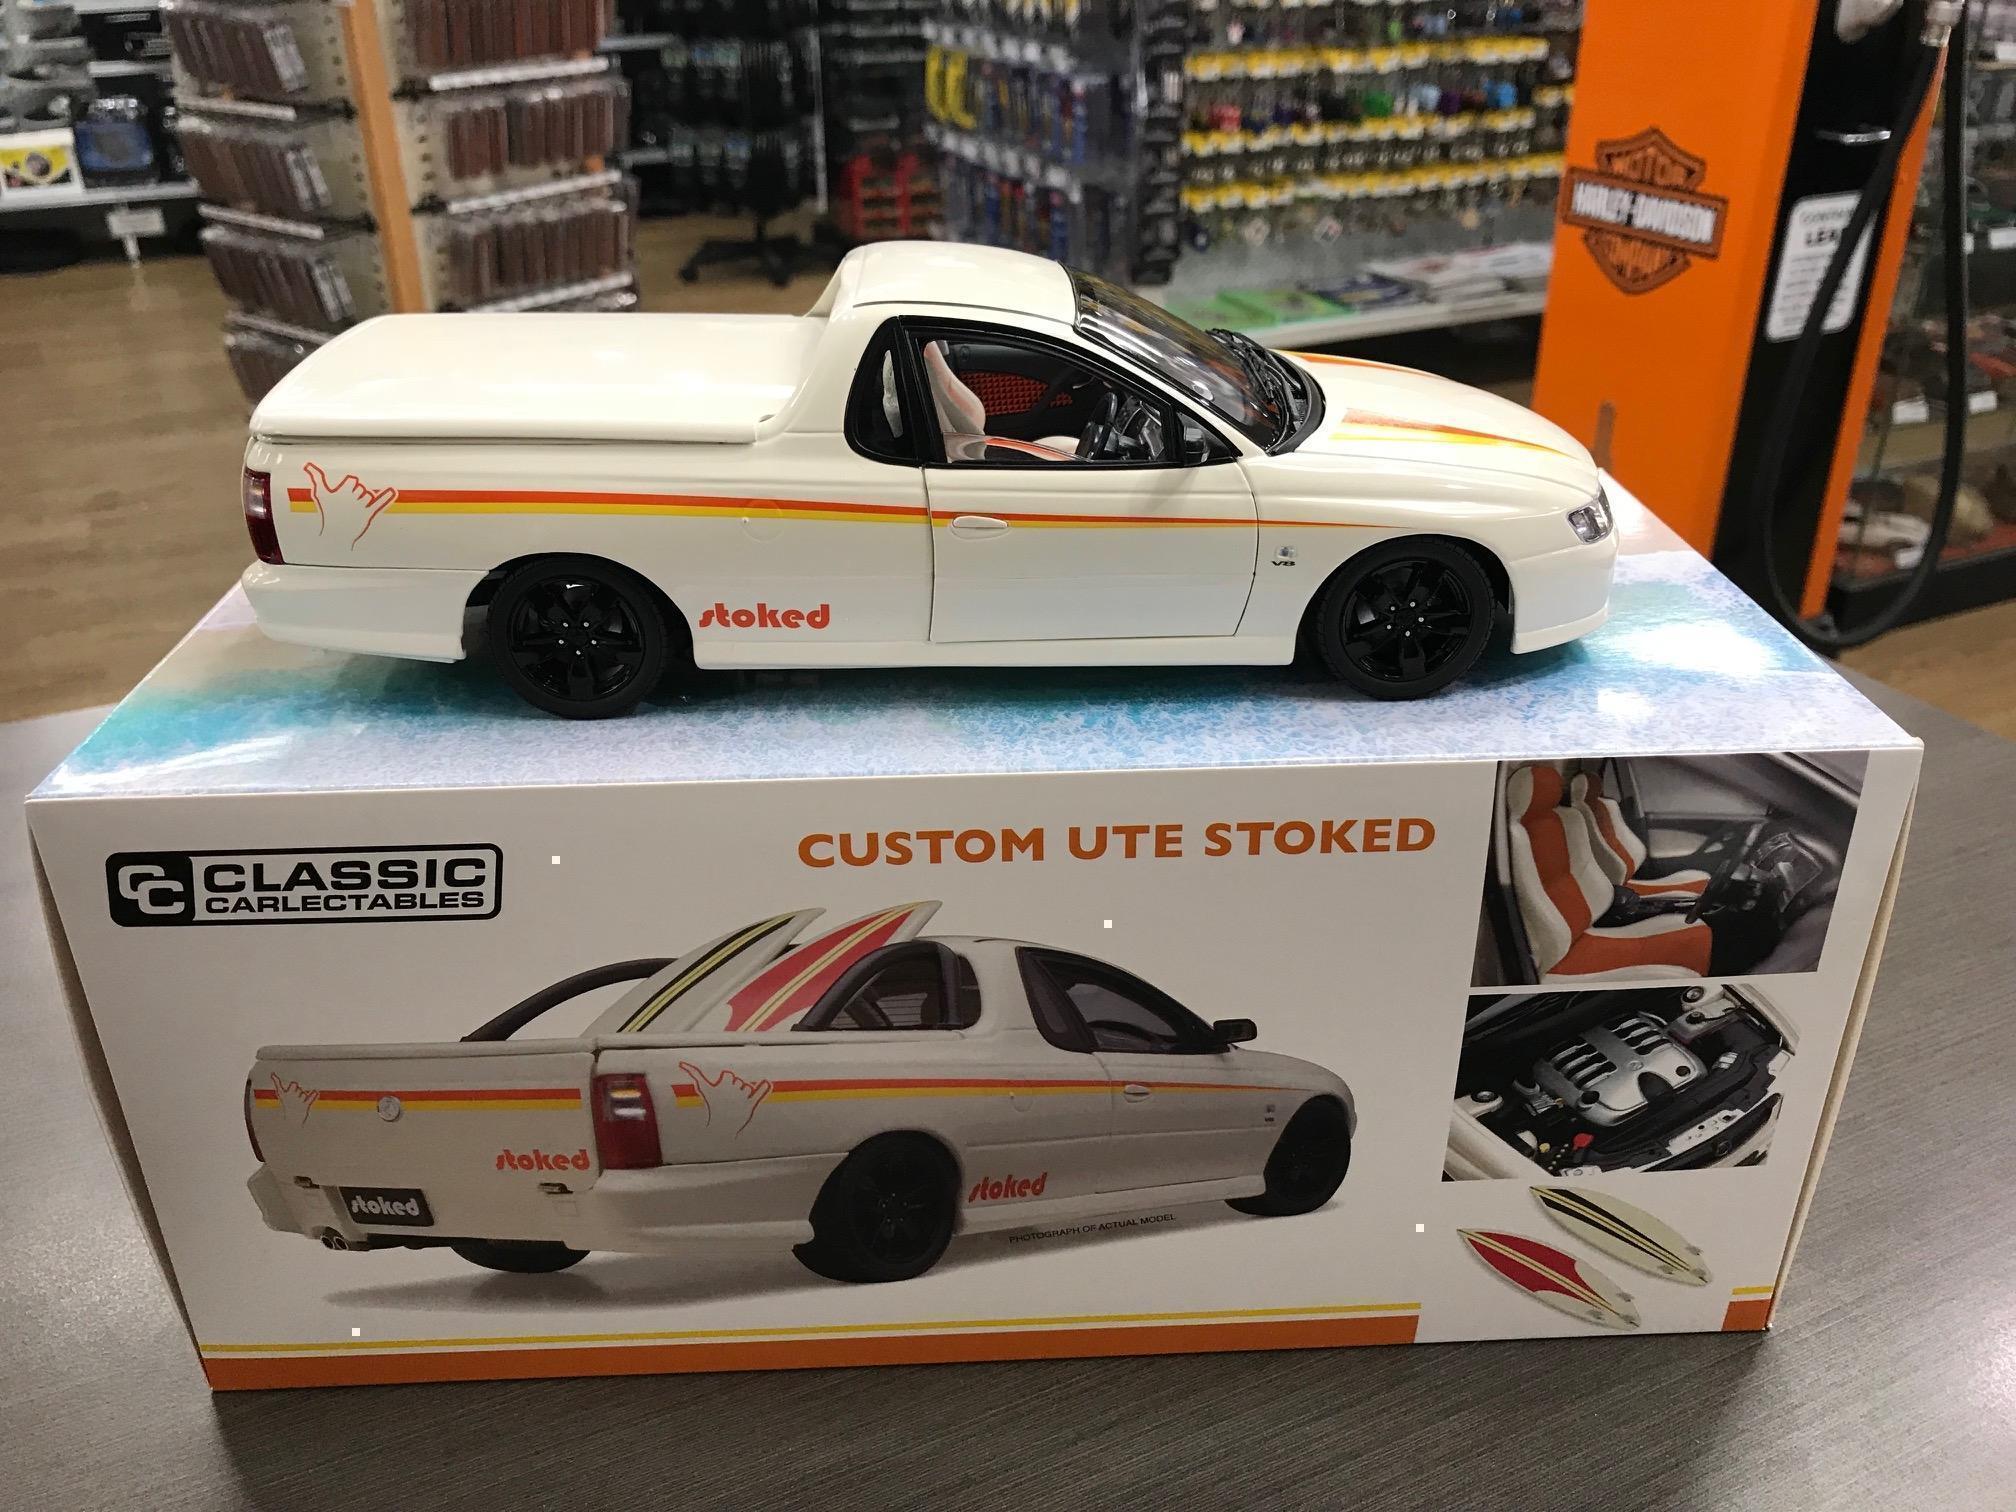 Holden Custom Ute Stoked White With Yellow And Orange Decals Die Cast Model Car 1:18 